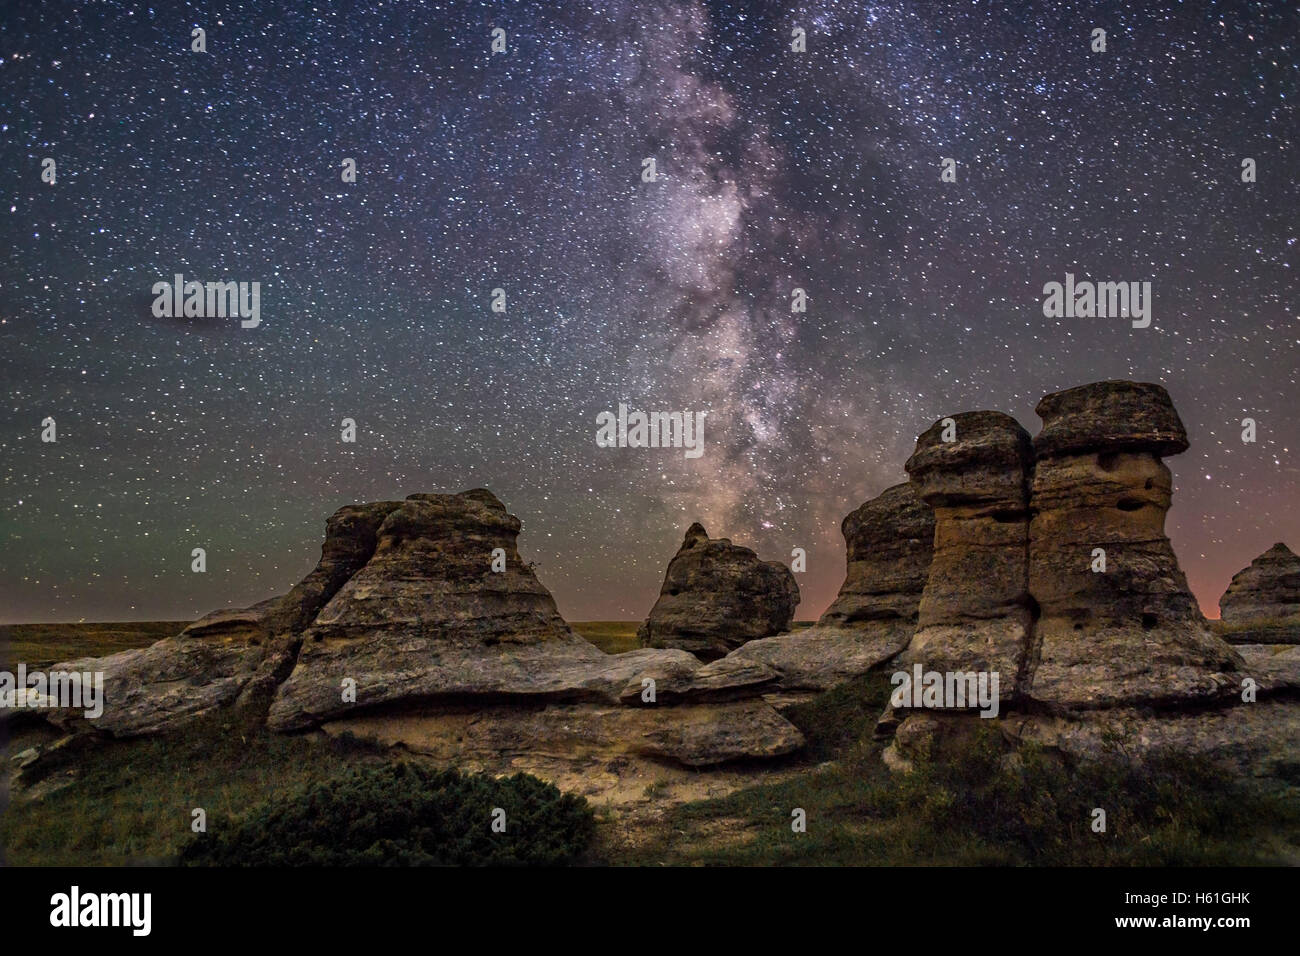 The Milky Way over the sandstone hoodoos of Writing-on-Stone Provincial Park in southern Alberta.   This is a comppsite of a sin Stock Photo